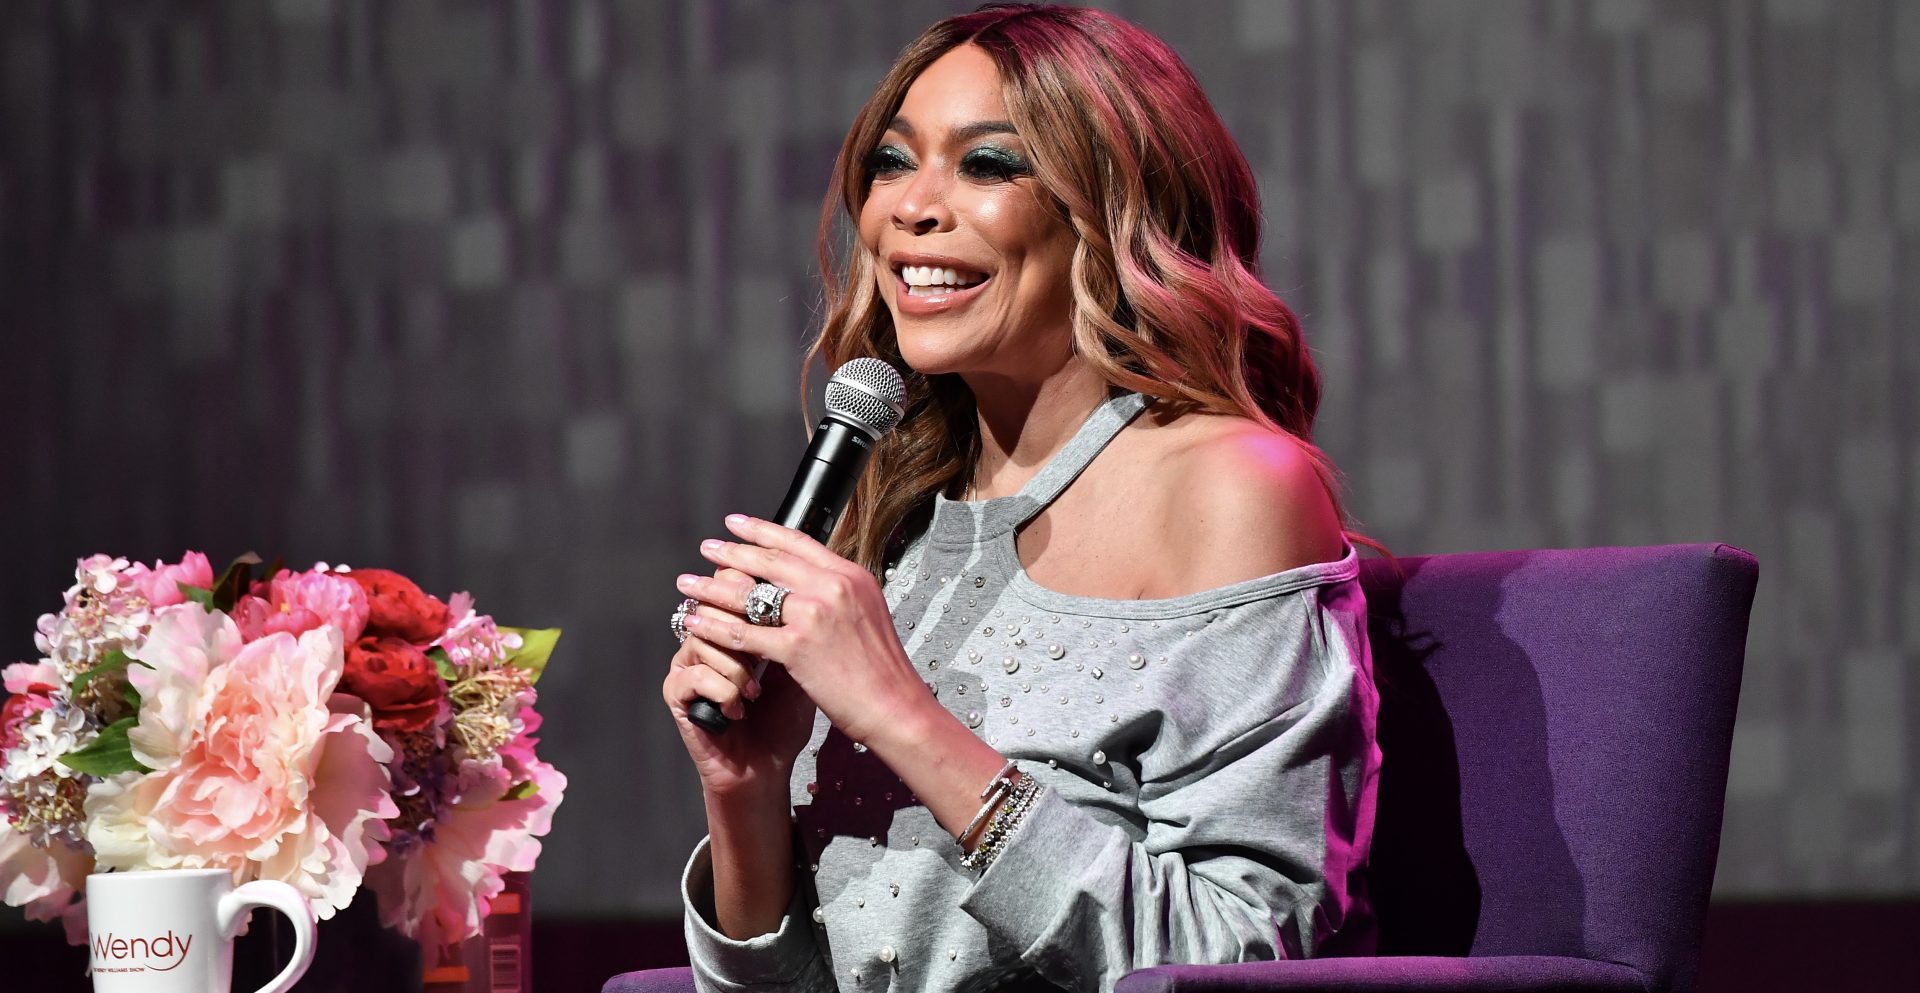 How You Doin'? Remembering The Legacy Of 'The Wendy Williams Show'